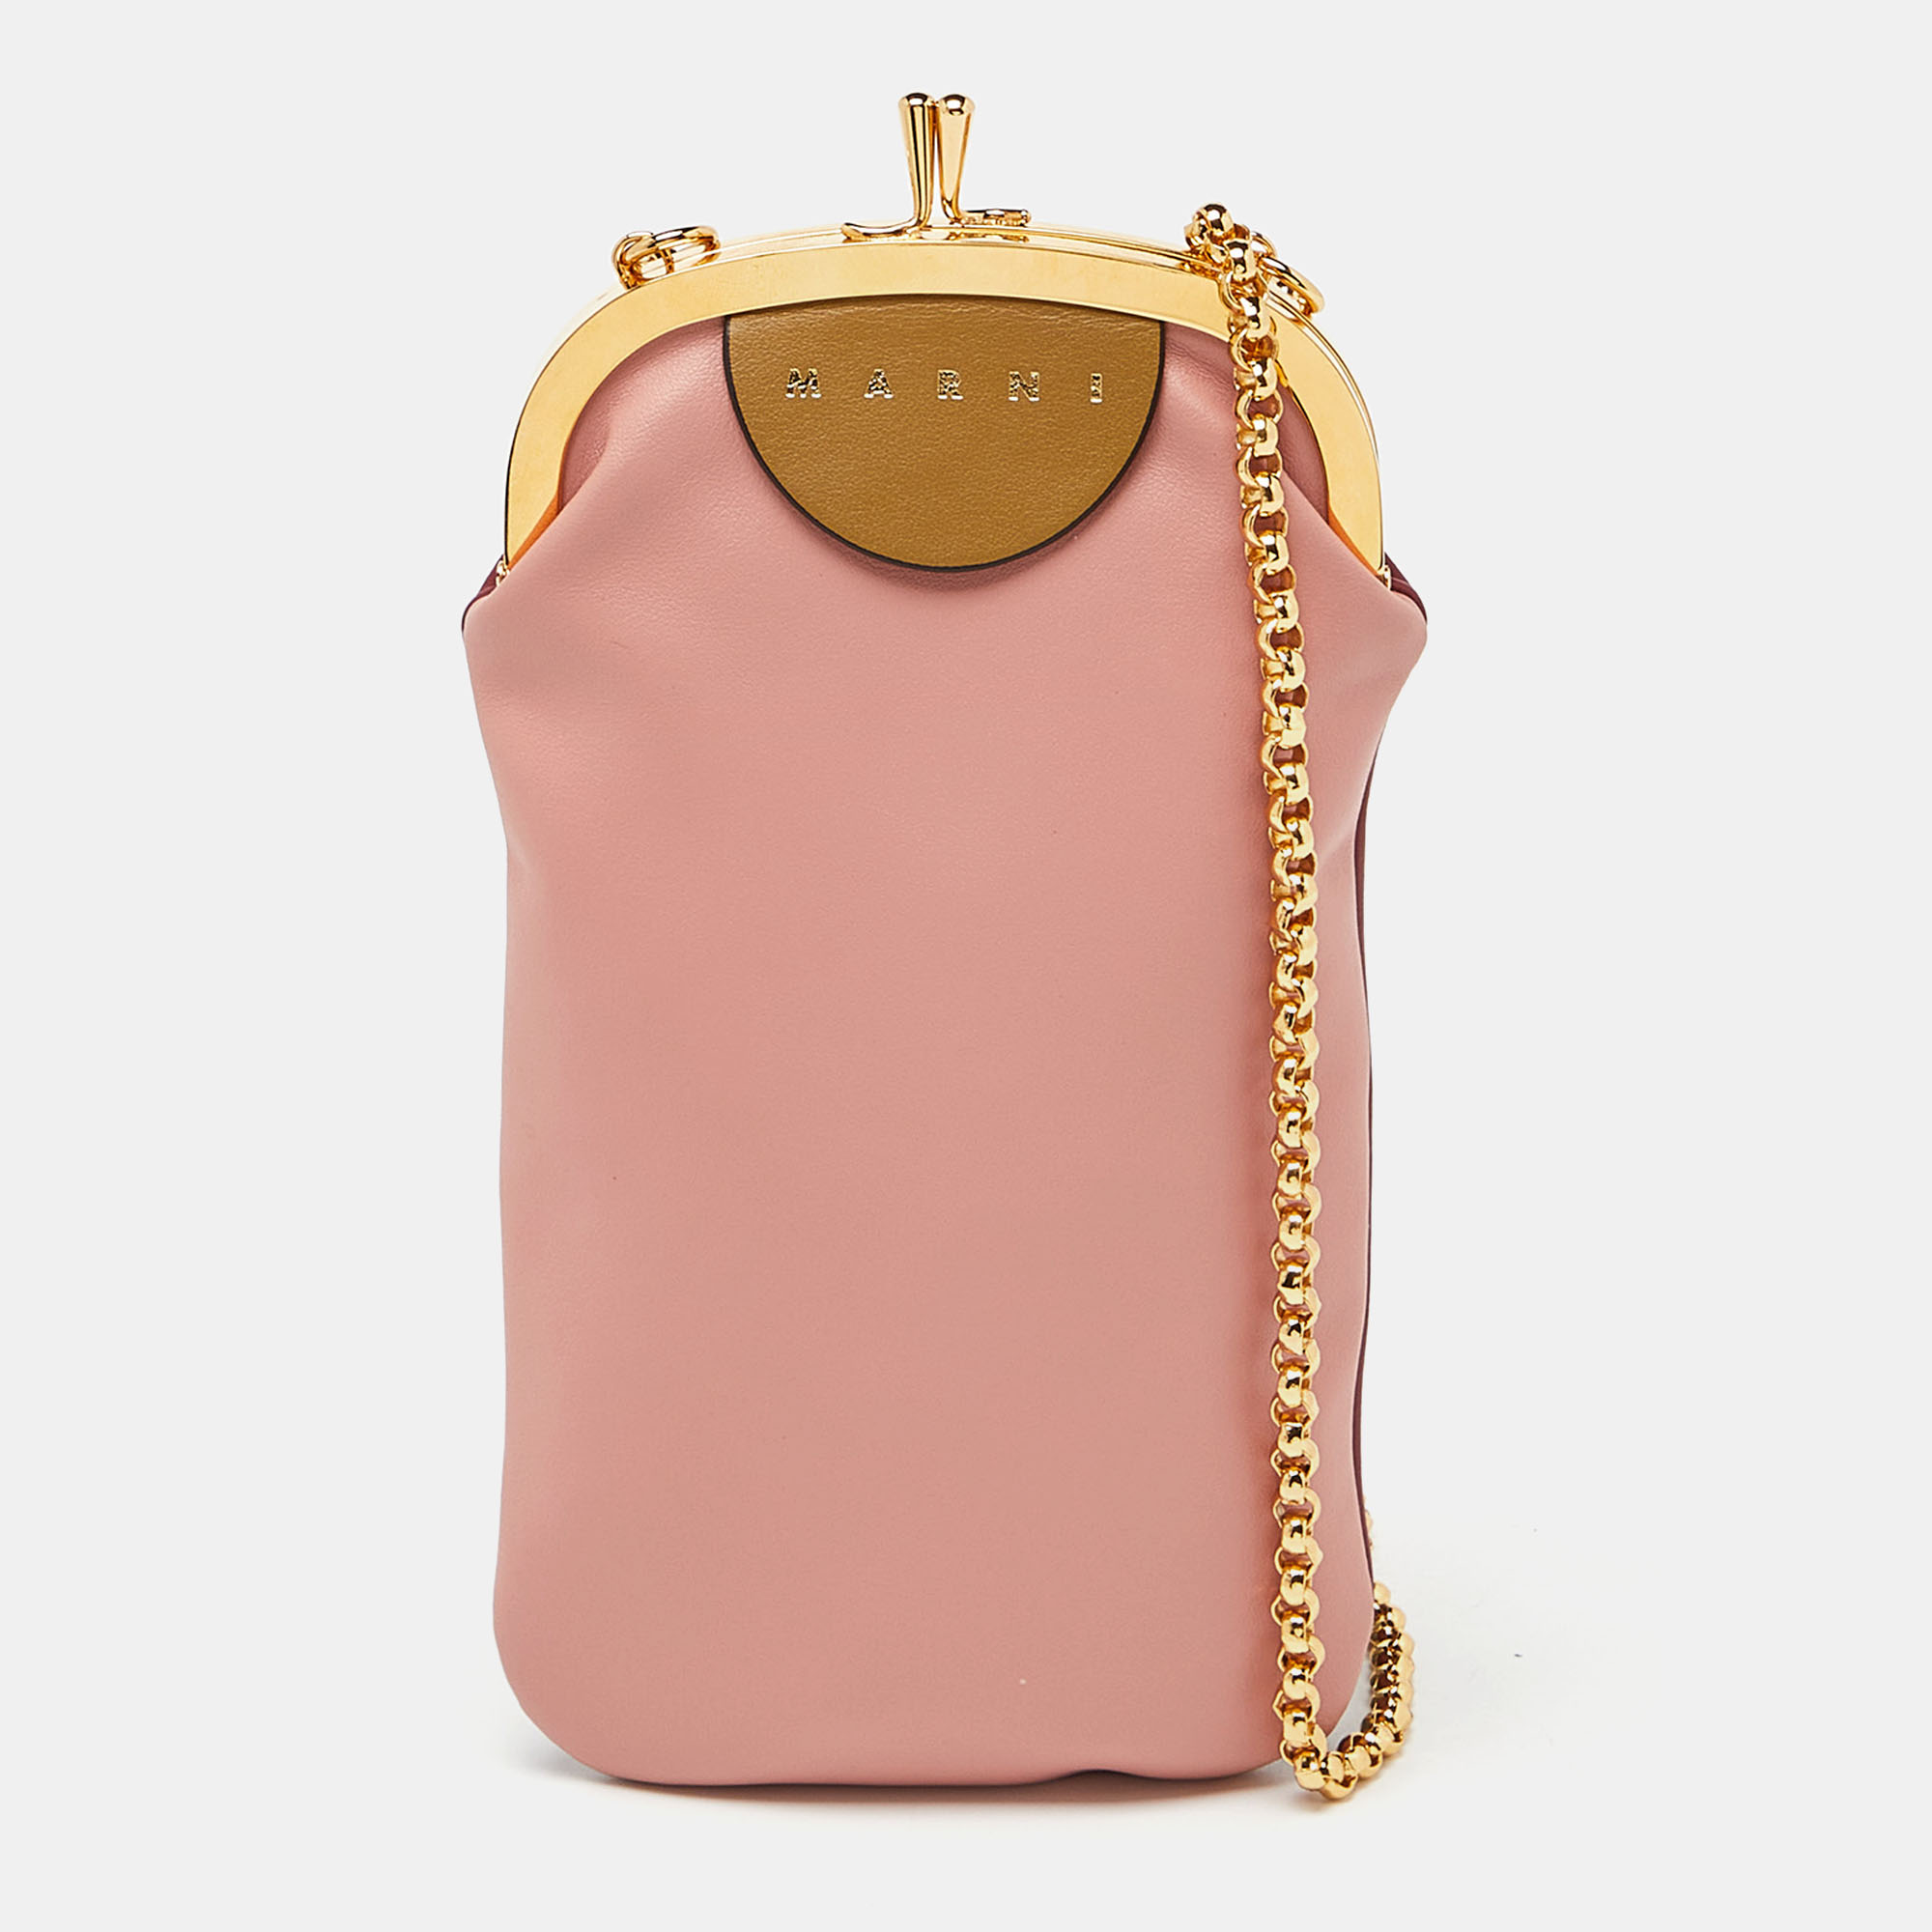 Marni pink/red leather kisslock phone chain pouch